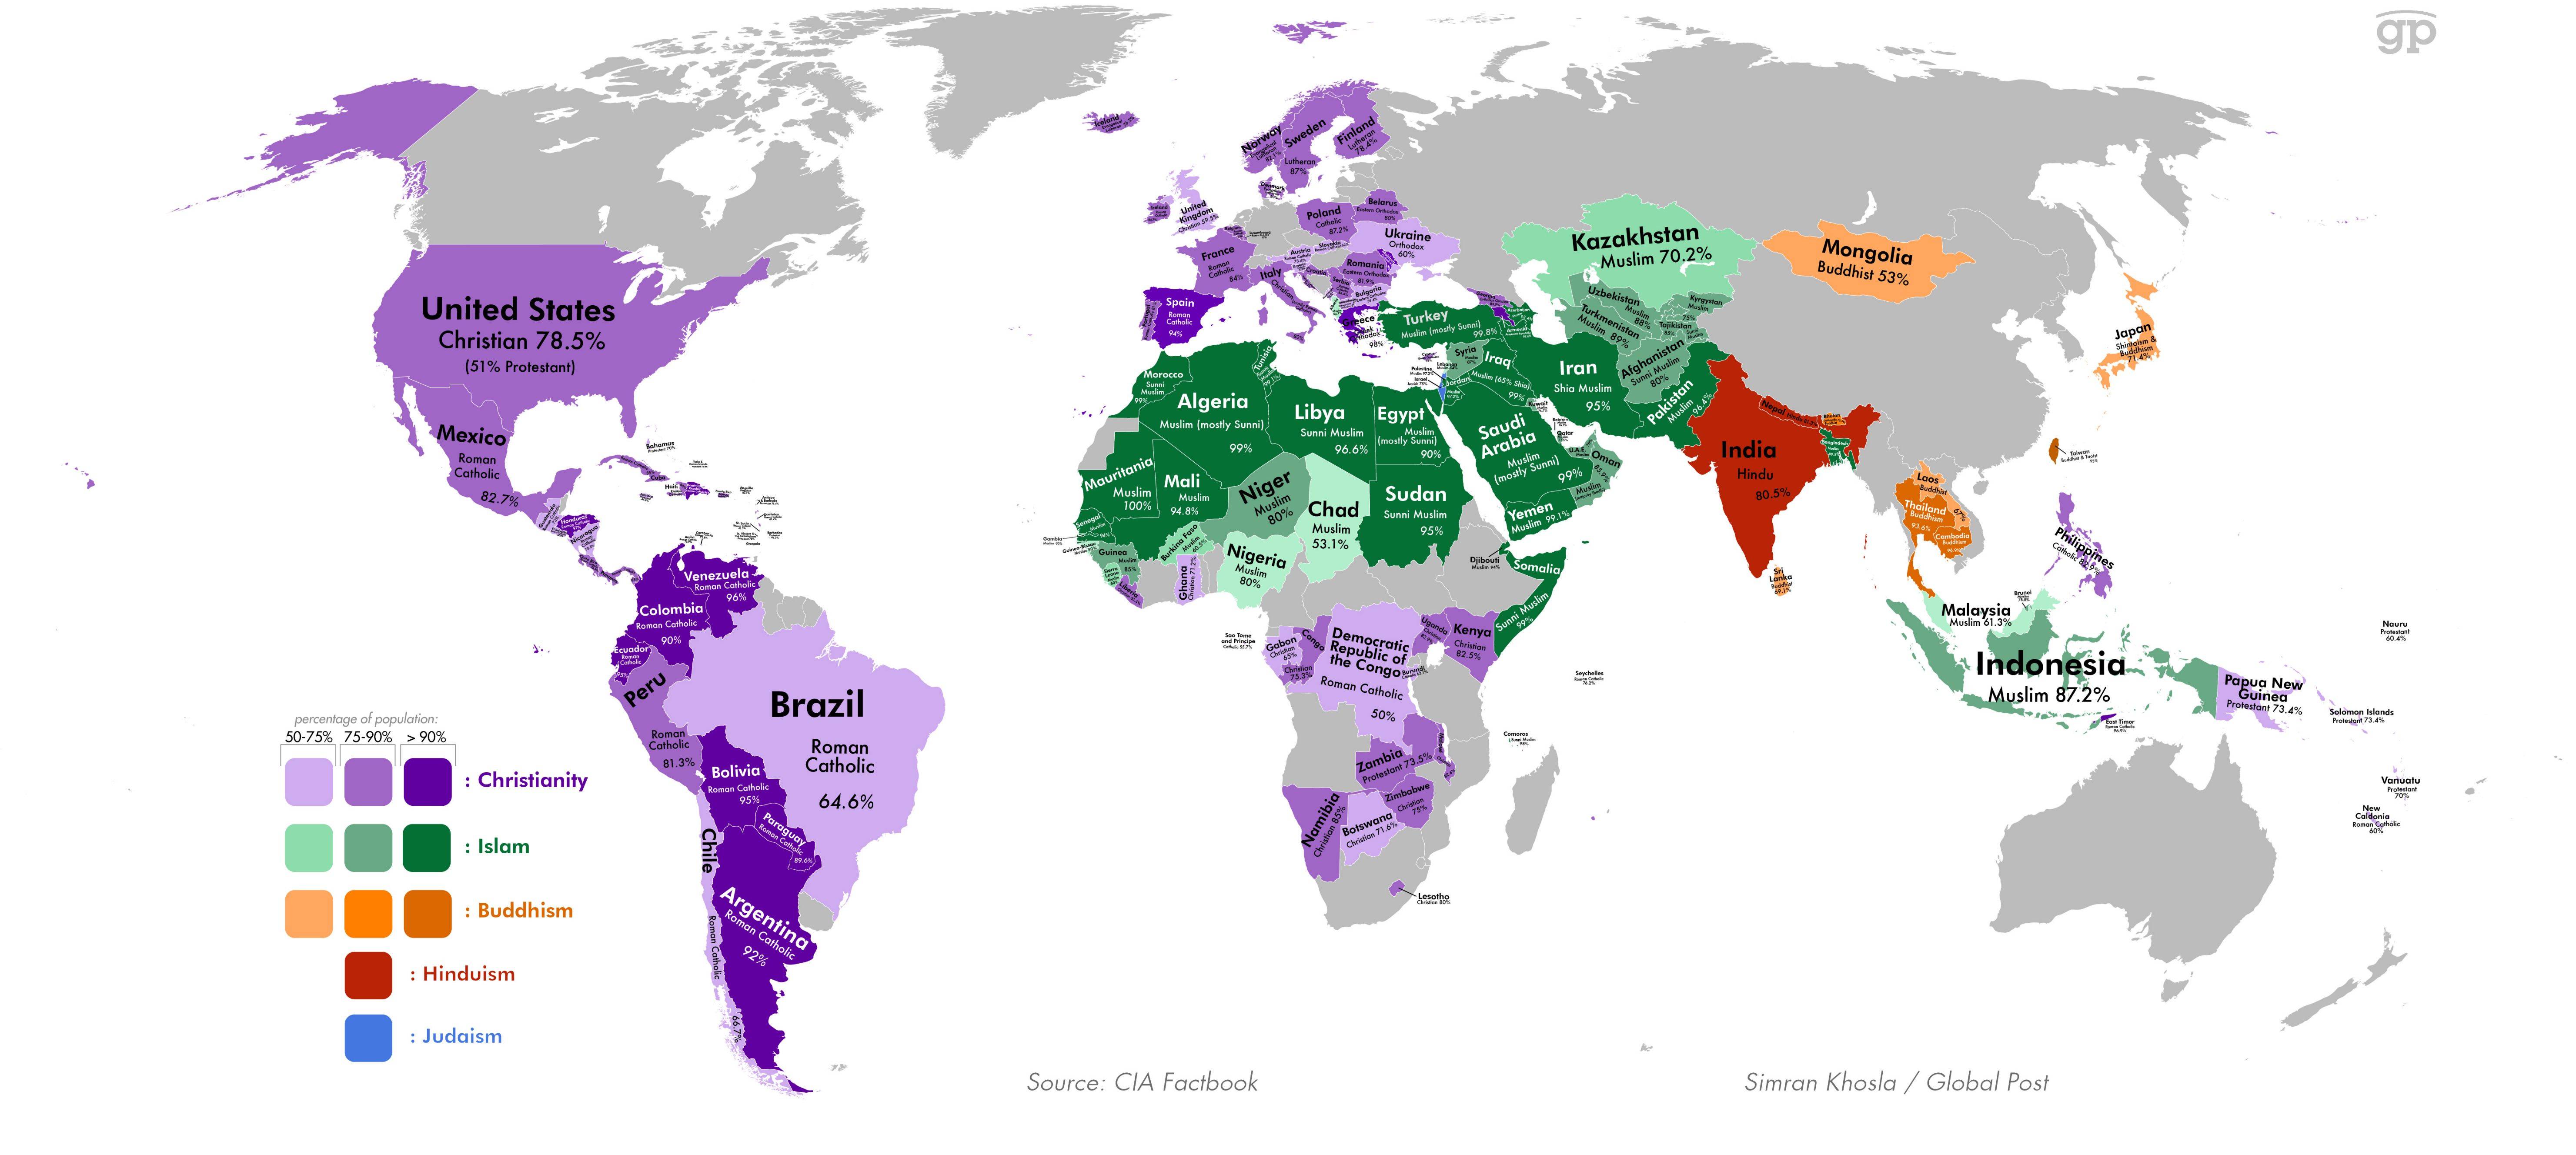 World Map of Religions